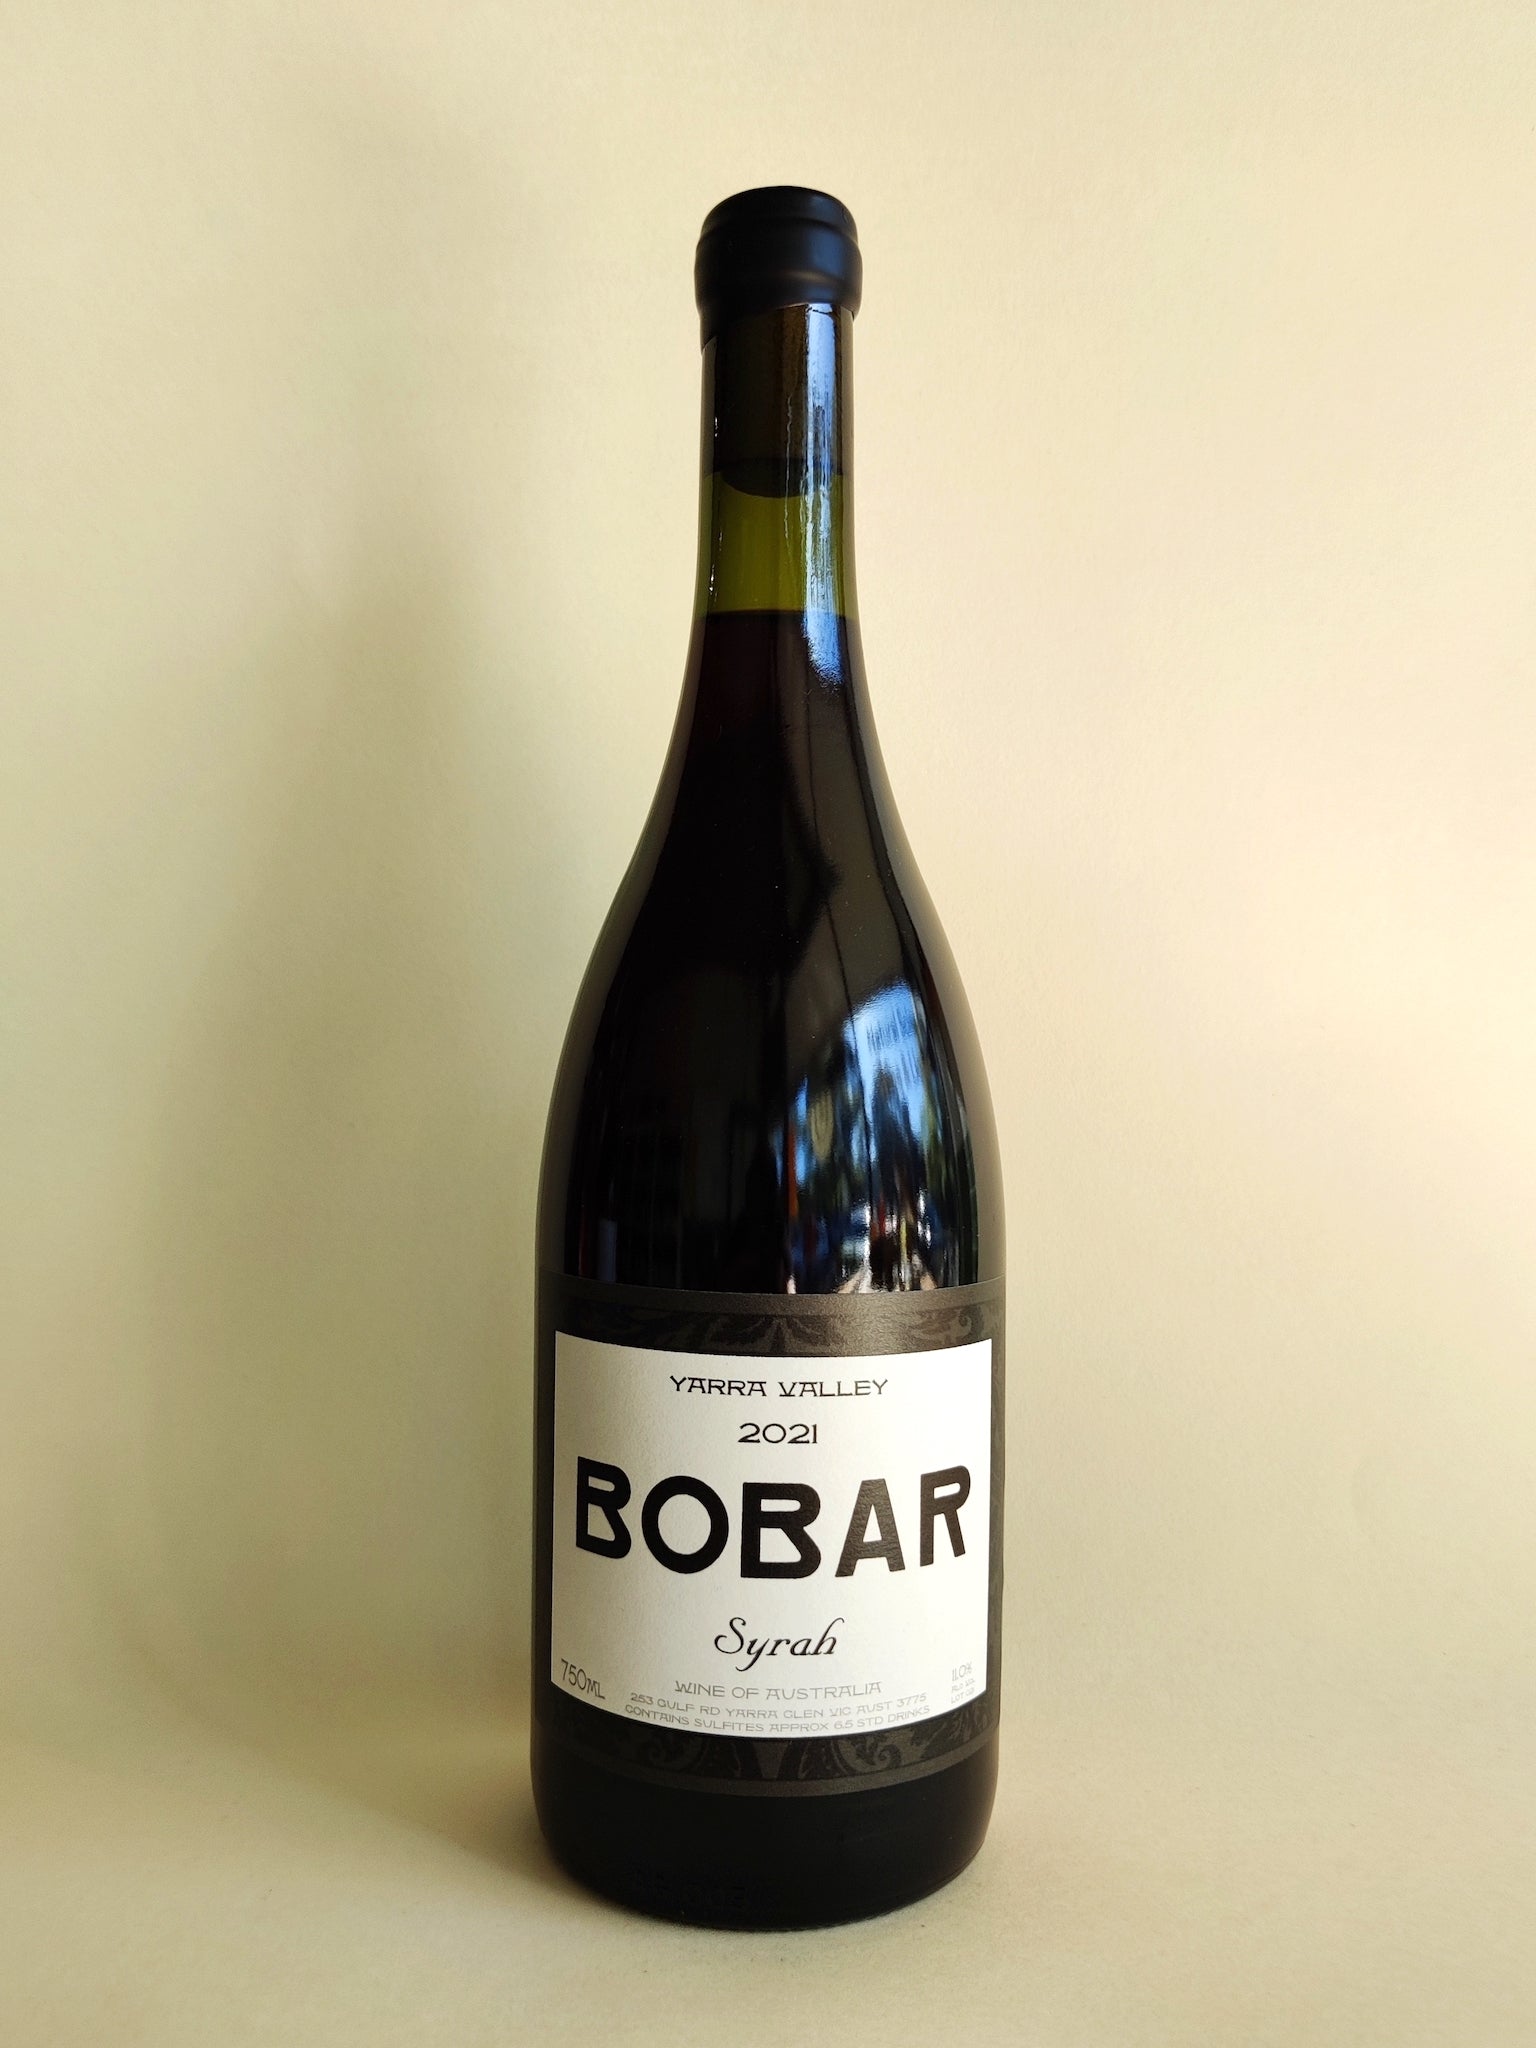 A bottle of Bobar Syrah from the Yarra Valley, Victoria.